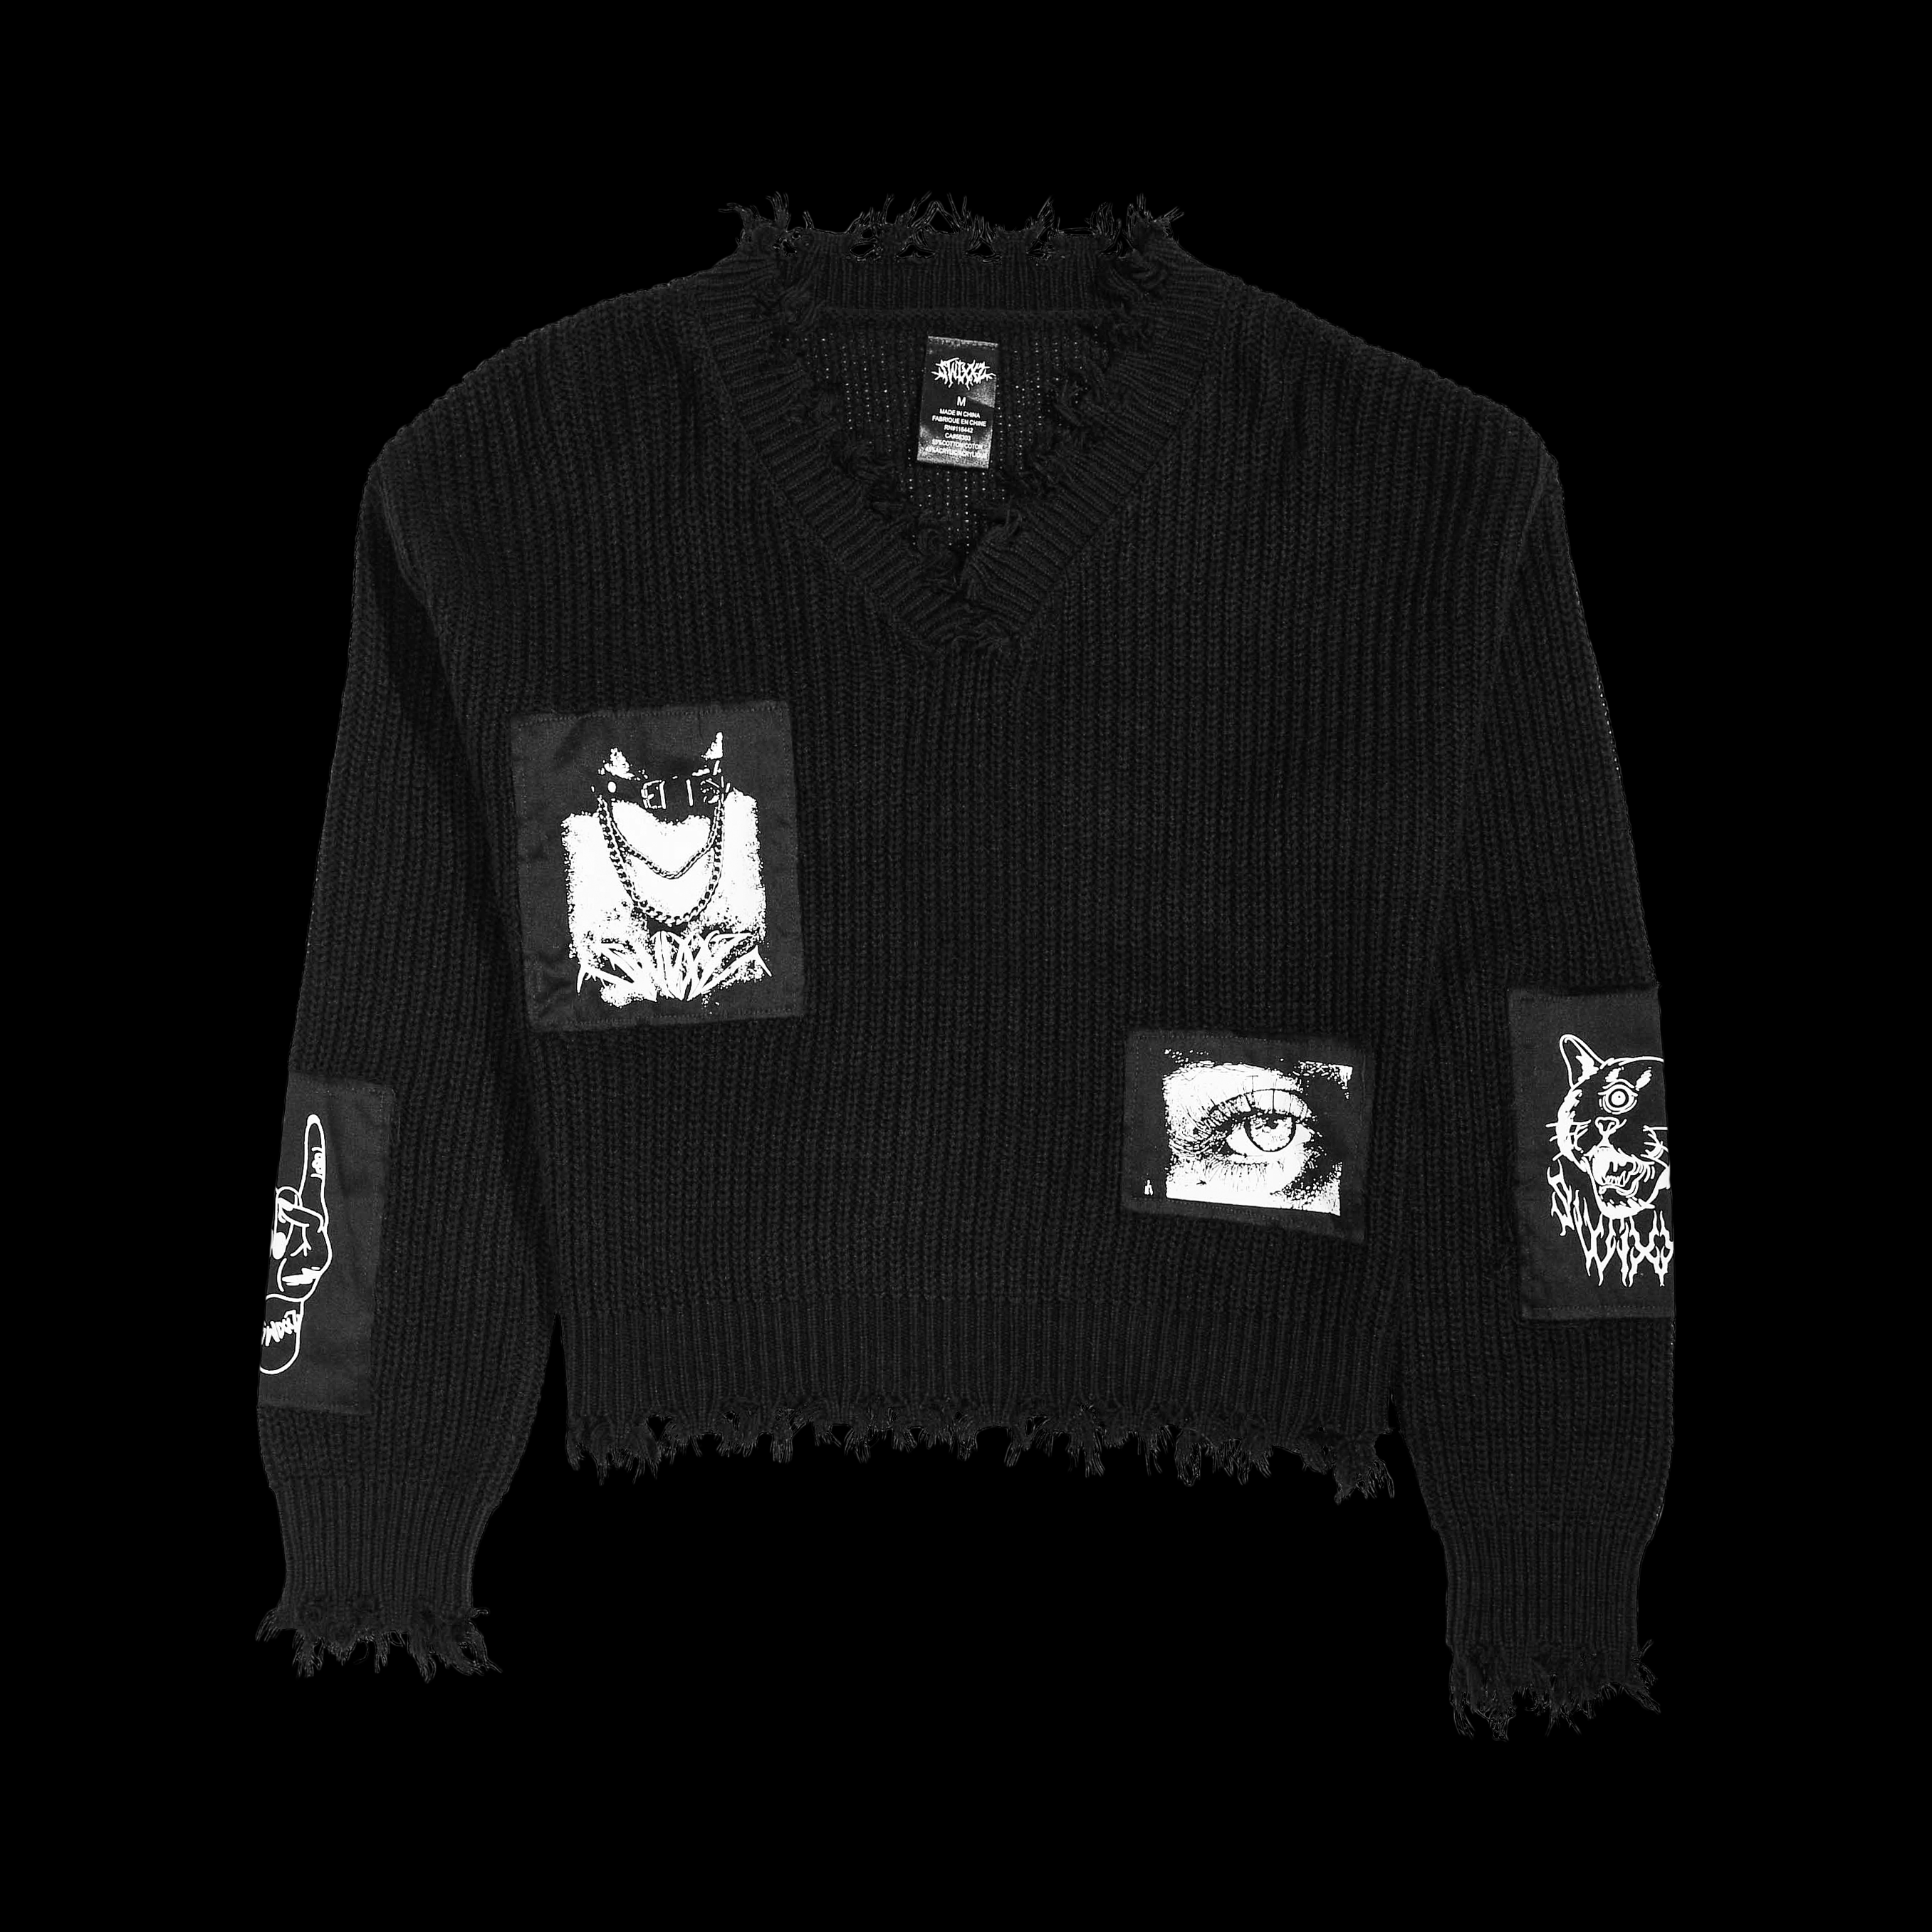 In My Head Distressed Sweater - Front - From SWIXXZ by Maggie Lindemann